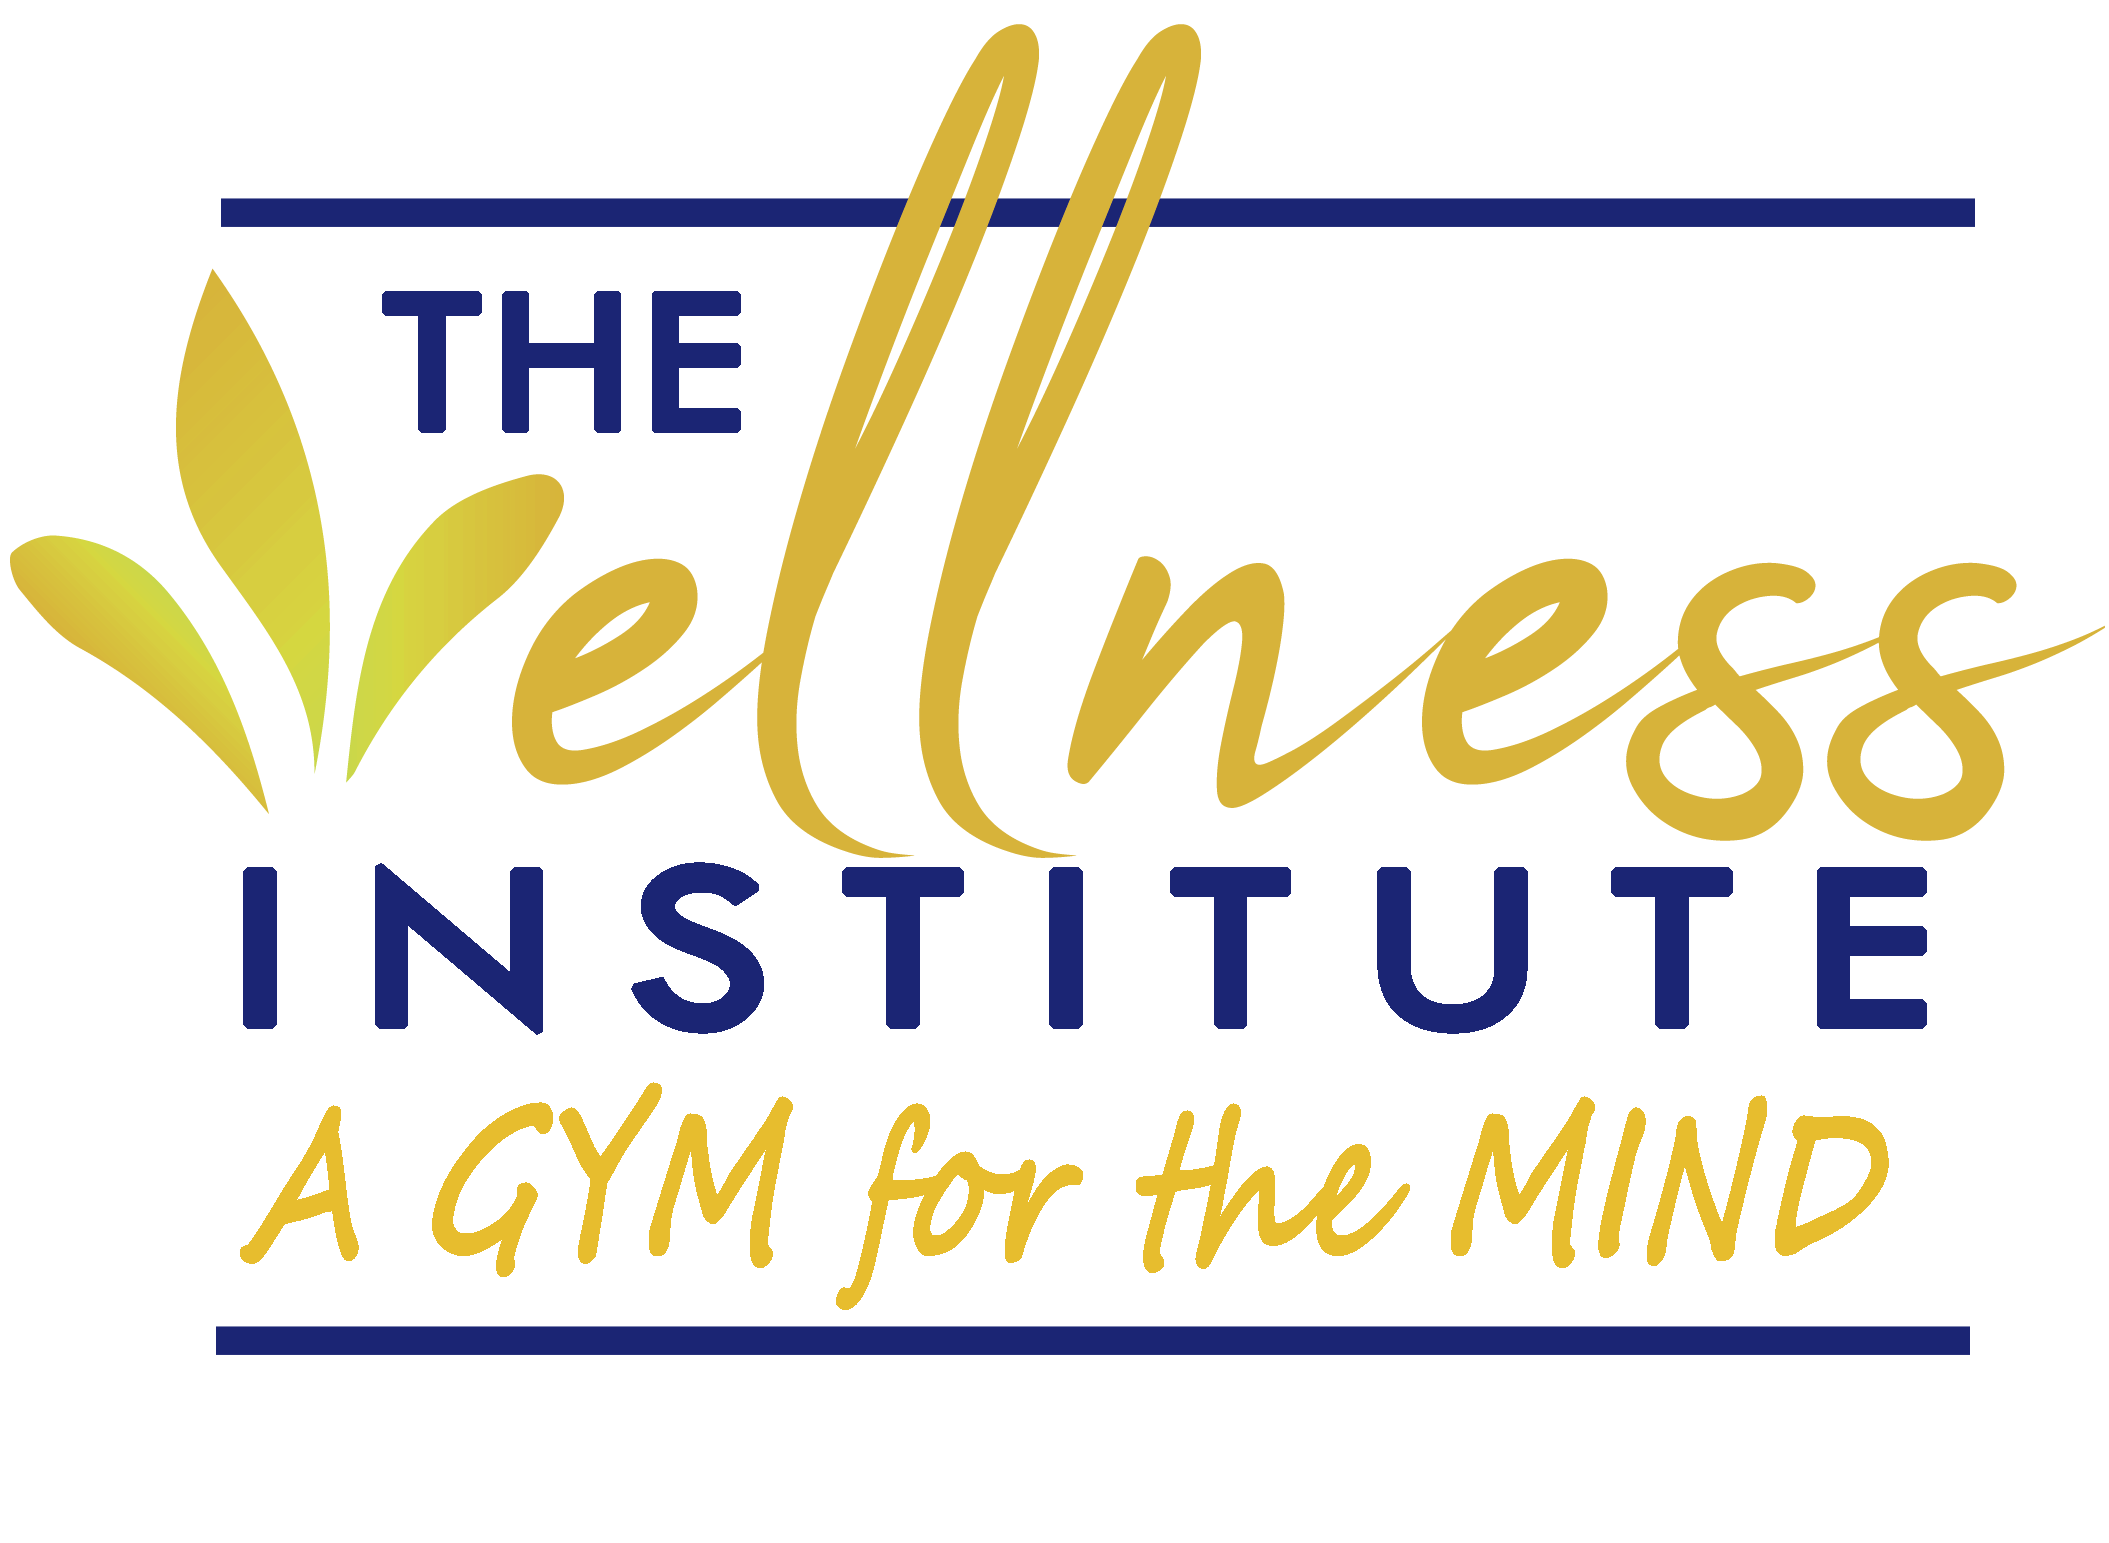 The Mind Gym at the Wellness Institute